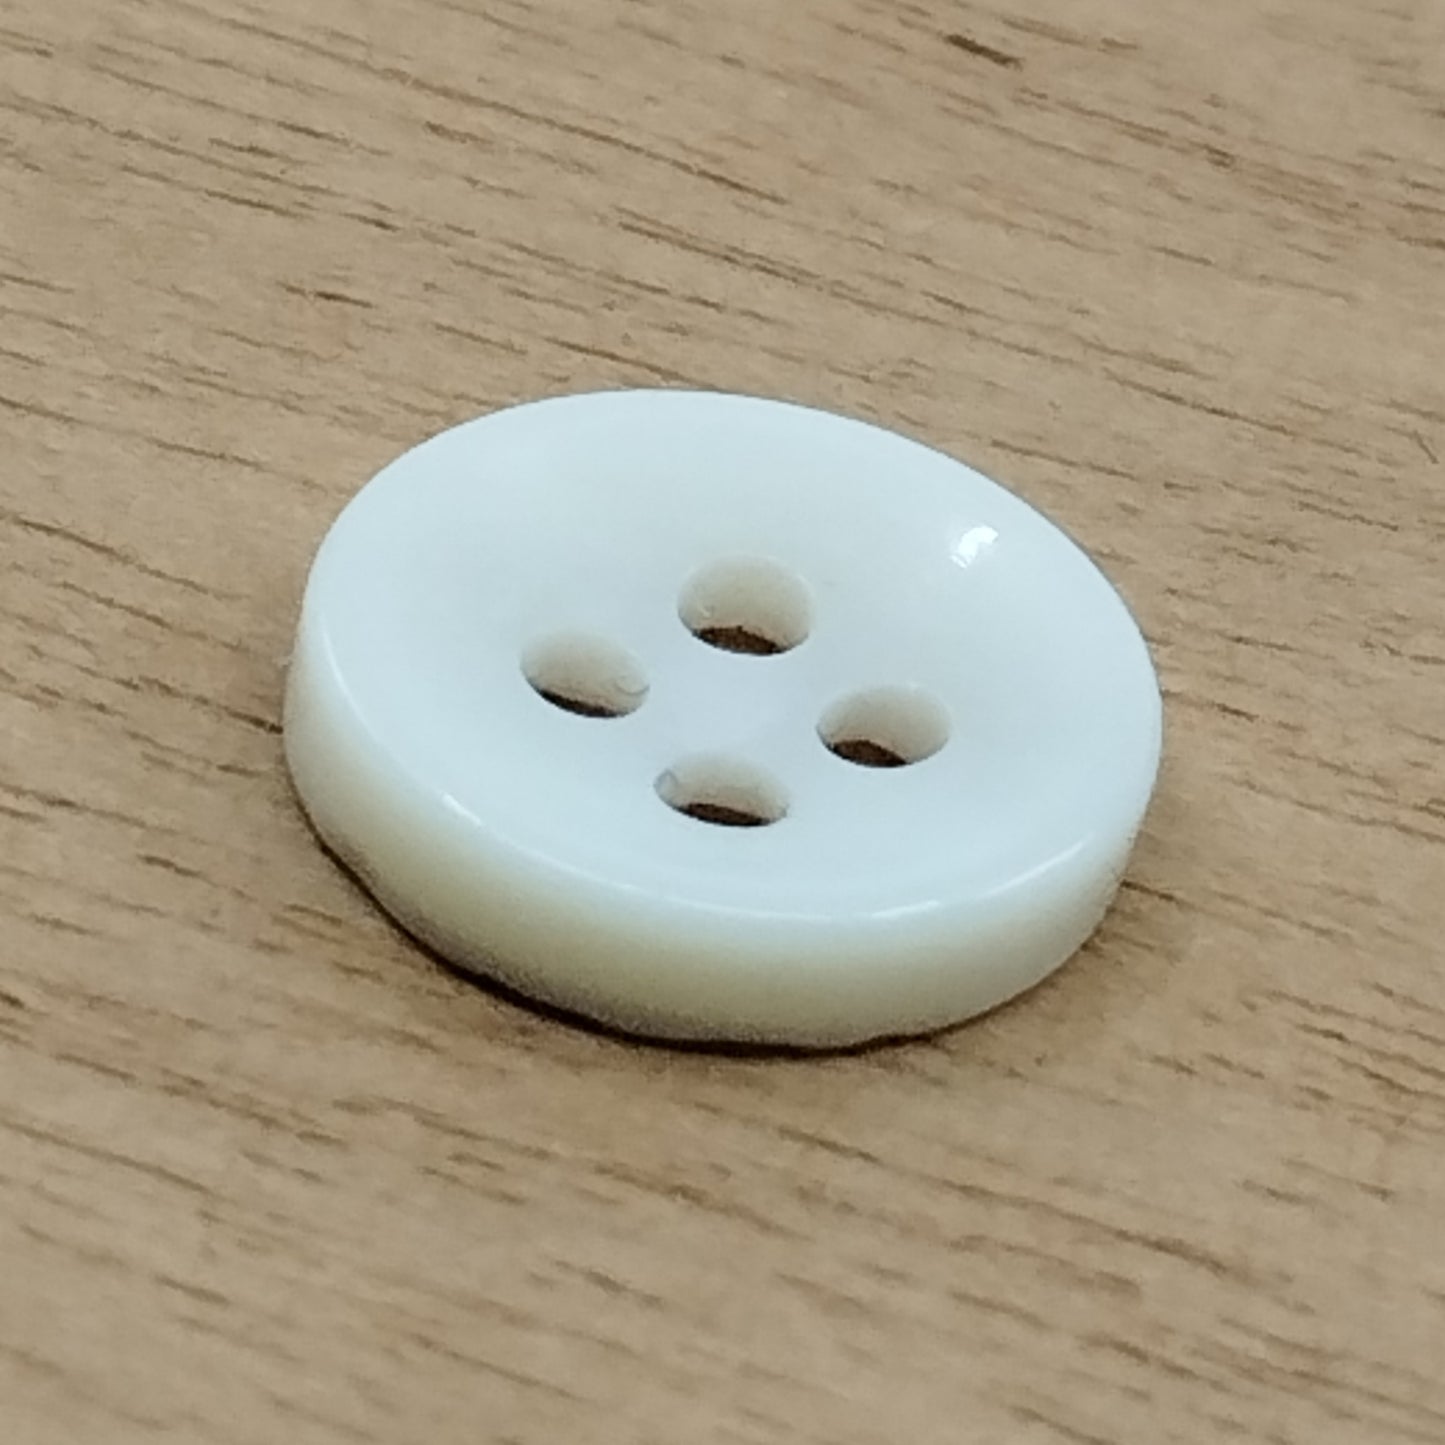 3.5 mm thick shirt buttons in real high quality Australian mother-of-pearl